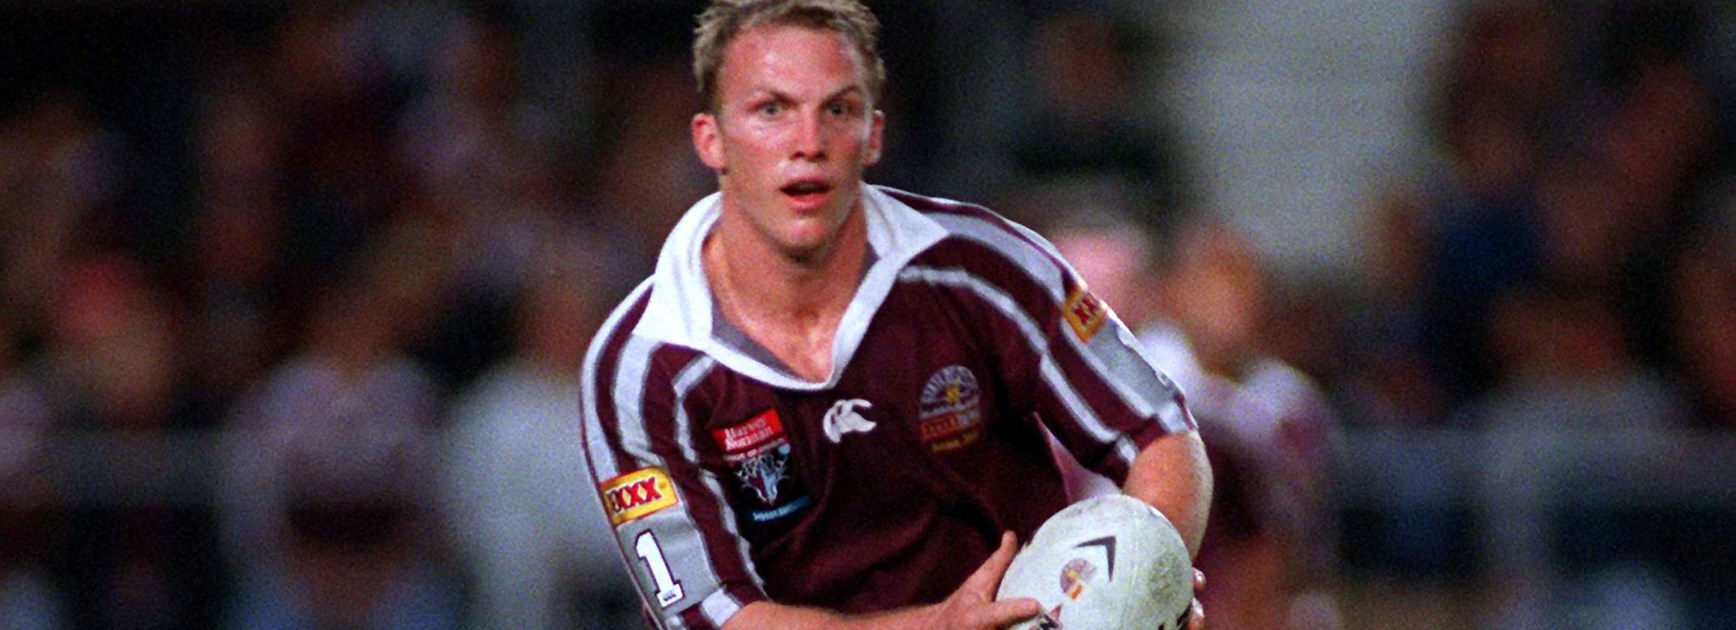 Lockyer: Bennett wanted to bring energy back to the jersey and it worked